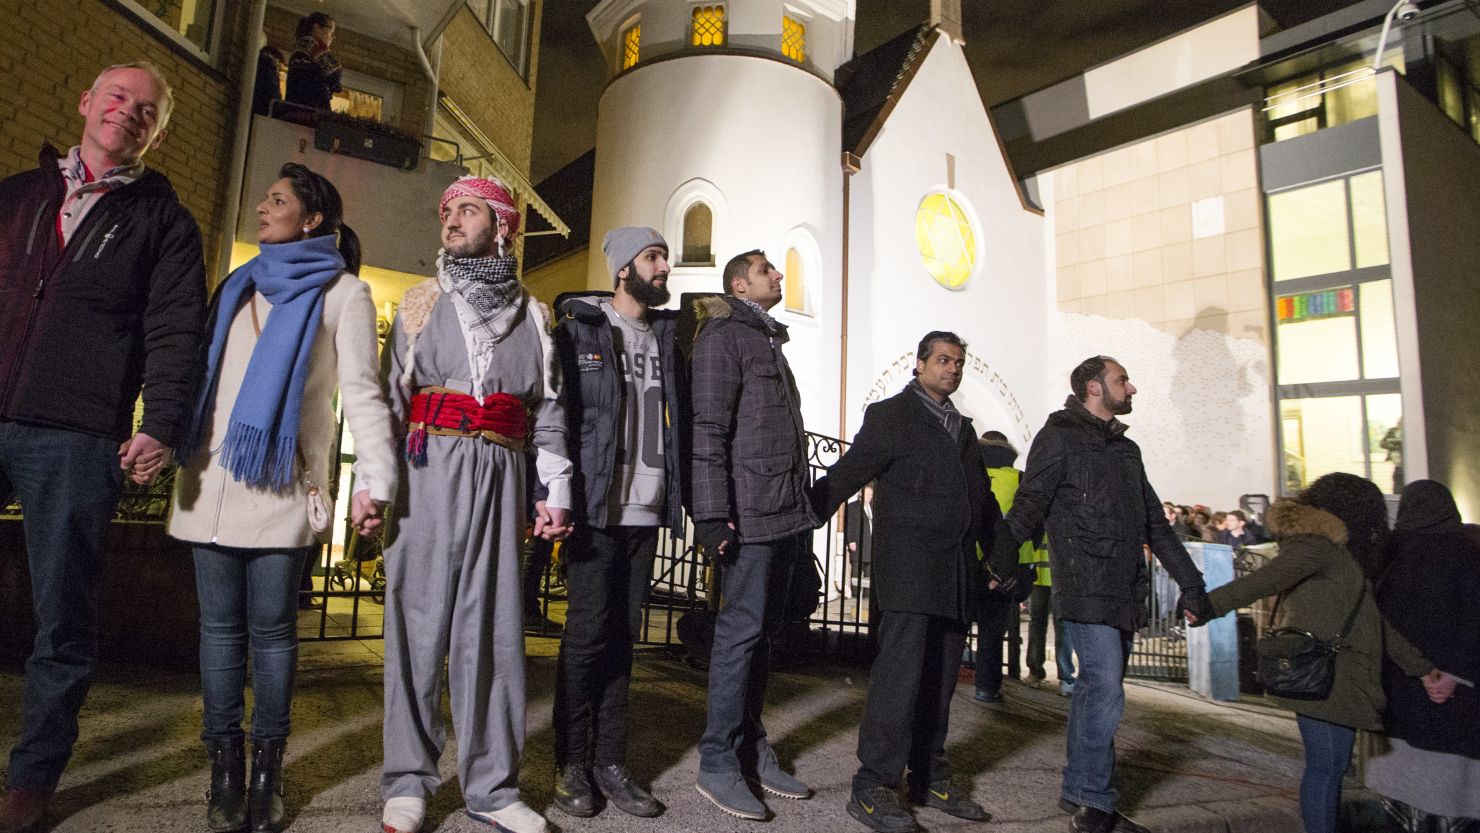 More than 1,000 people formed a "ring of peace" around the Norwegian capital's synagogue, an initiative taken by young Muslims in Norway after a series of attacks against Jews in Europe, in Oslo, Saturday, Feb. 21 2015.